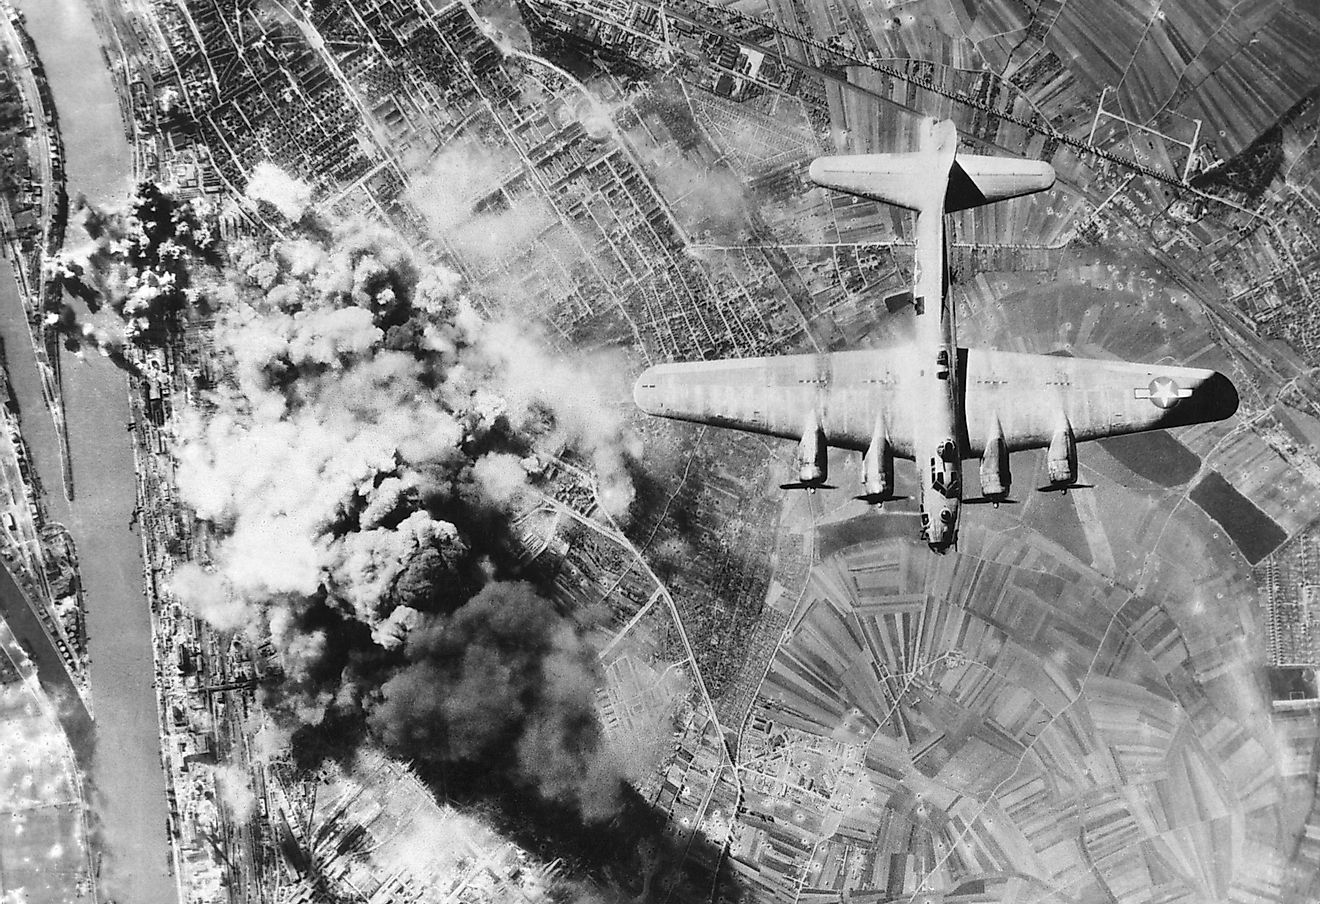 American B-17 flying fortresses bombs Ludwigshafen chemical and synthetic oil works, Germany.  Editorial credit: Everett Collection / Shutterstock.com